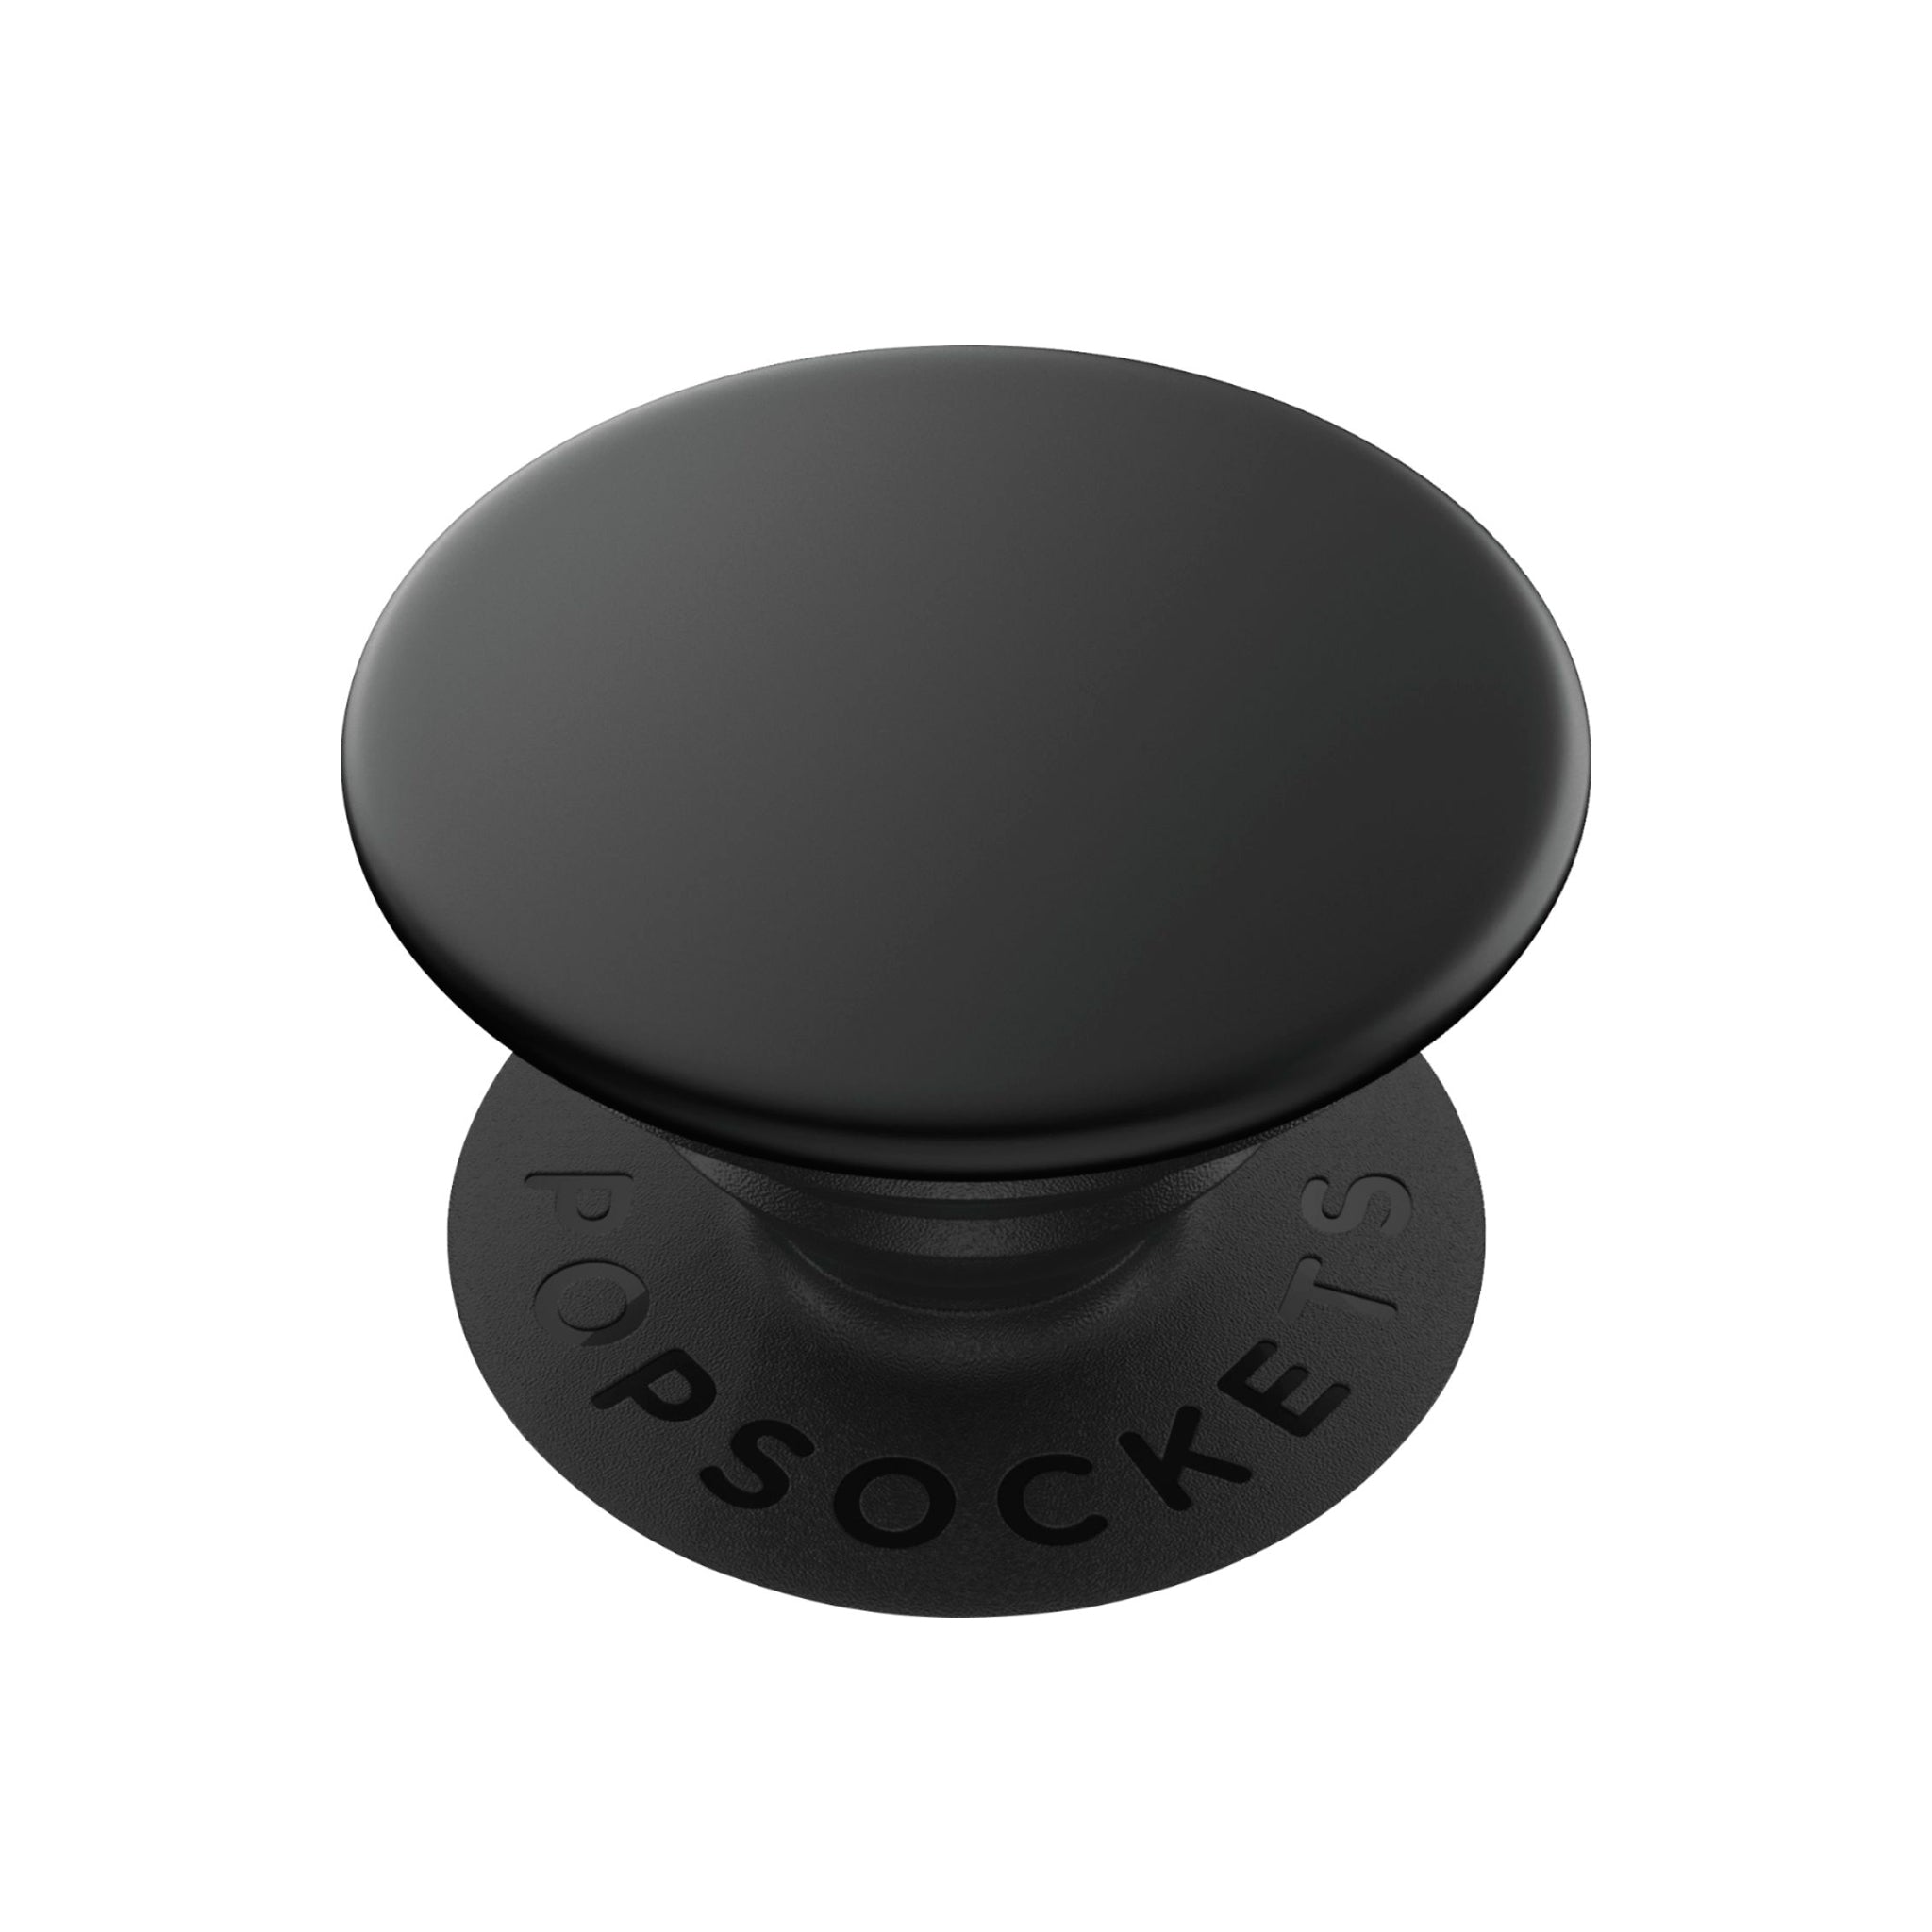 Popsockets - Popgrip Swappable Abstract Device Stand And Grip - Black